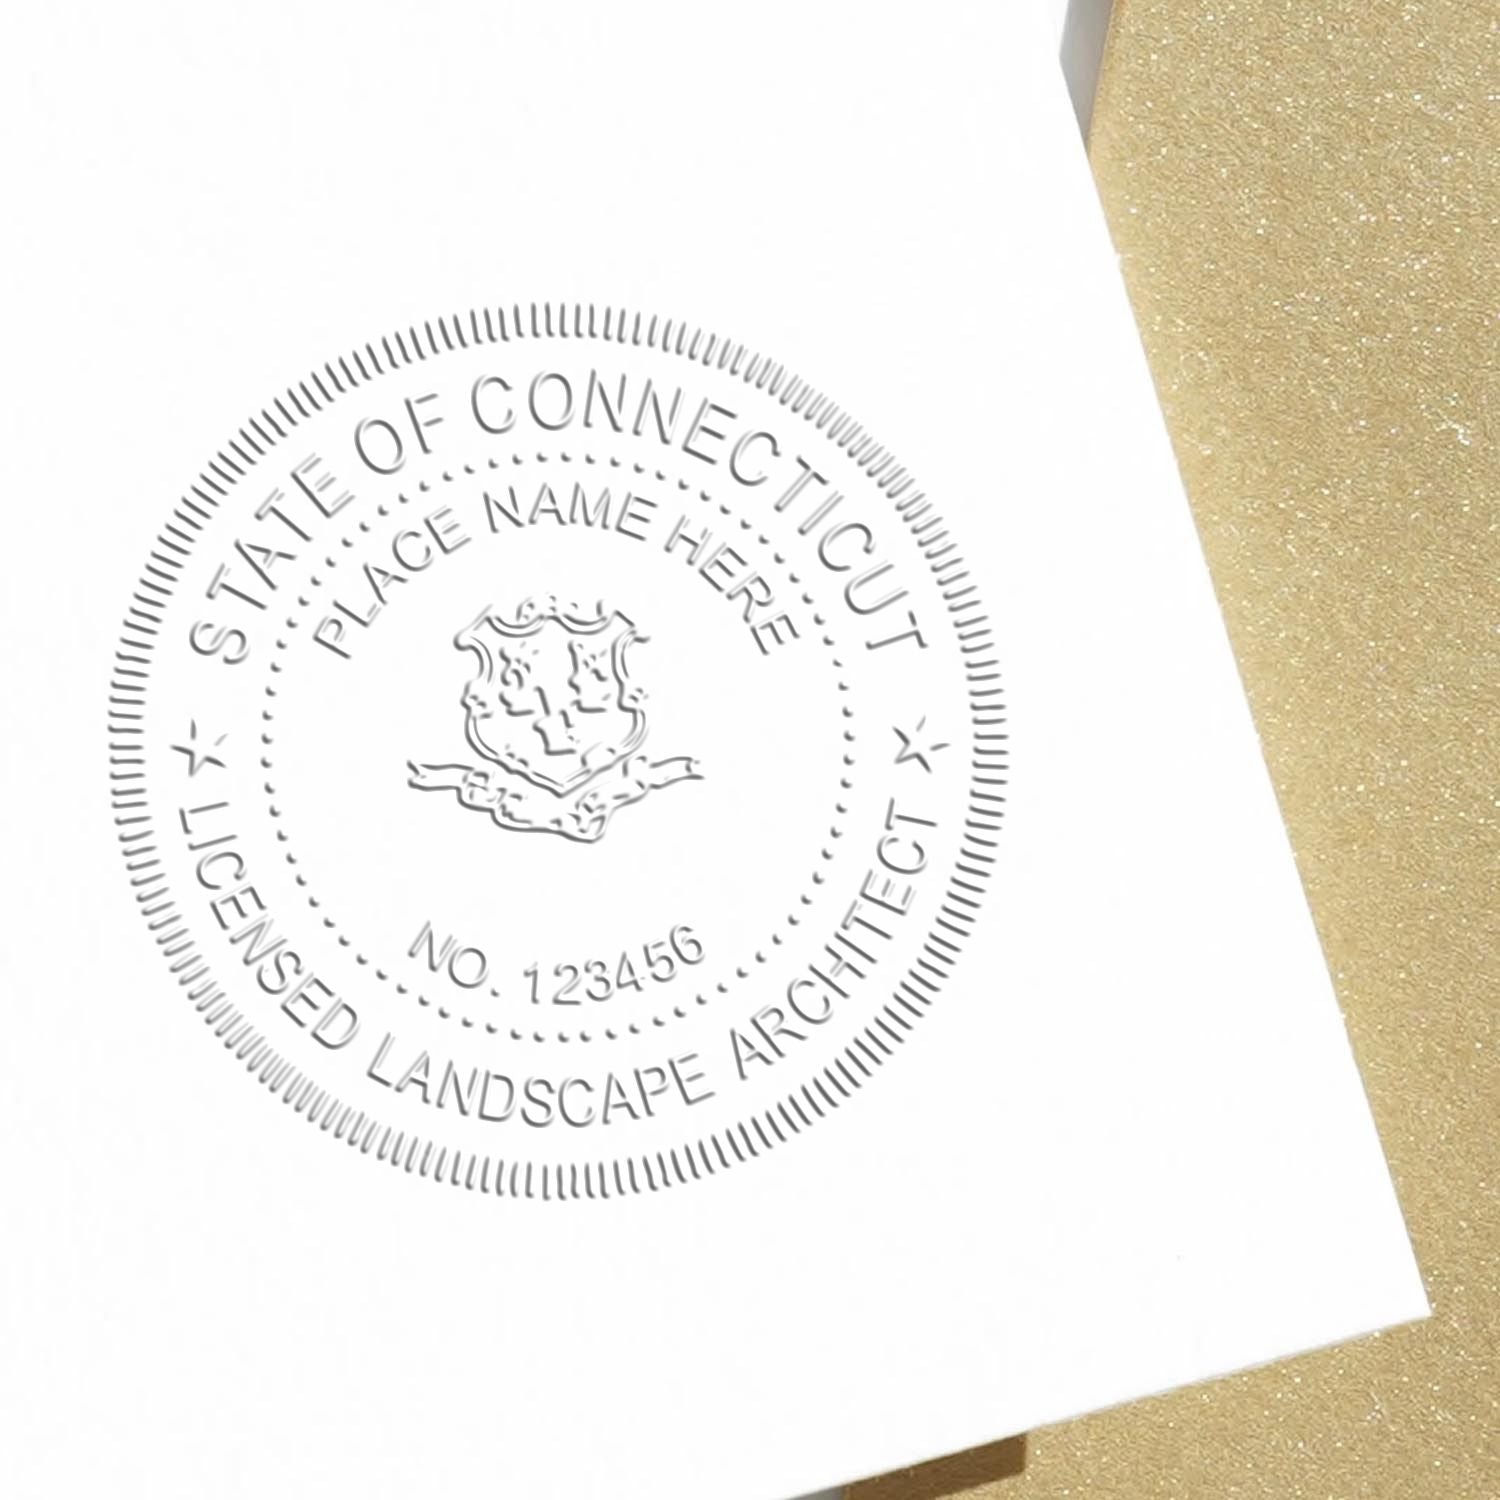 An alternative view of the Connecticut Long Reach Landscape Architect Embossing Stamp stamped on a sheet of paper showing the image in use